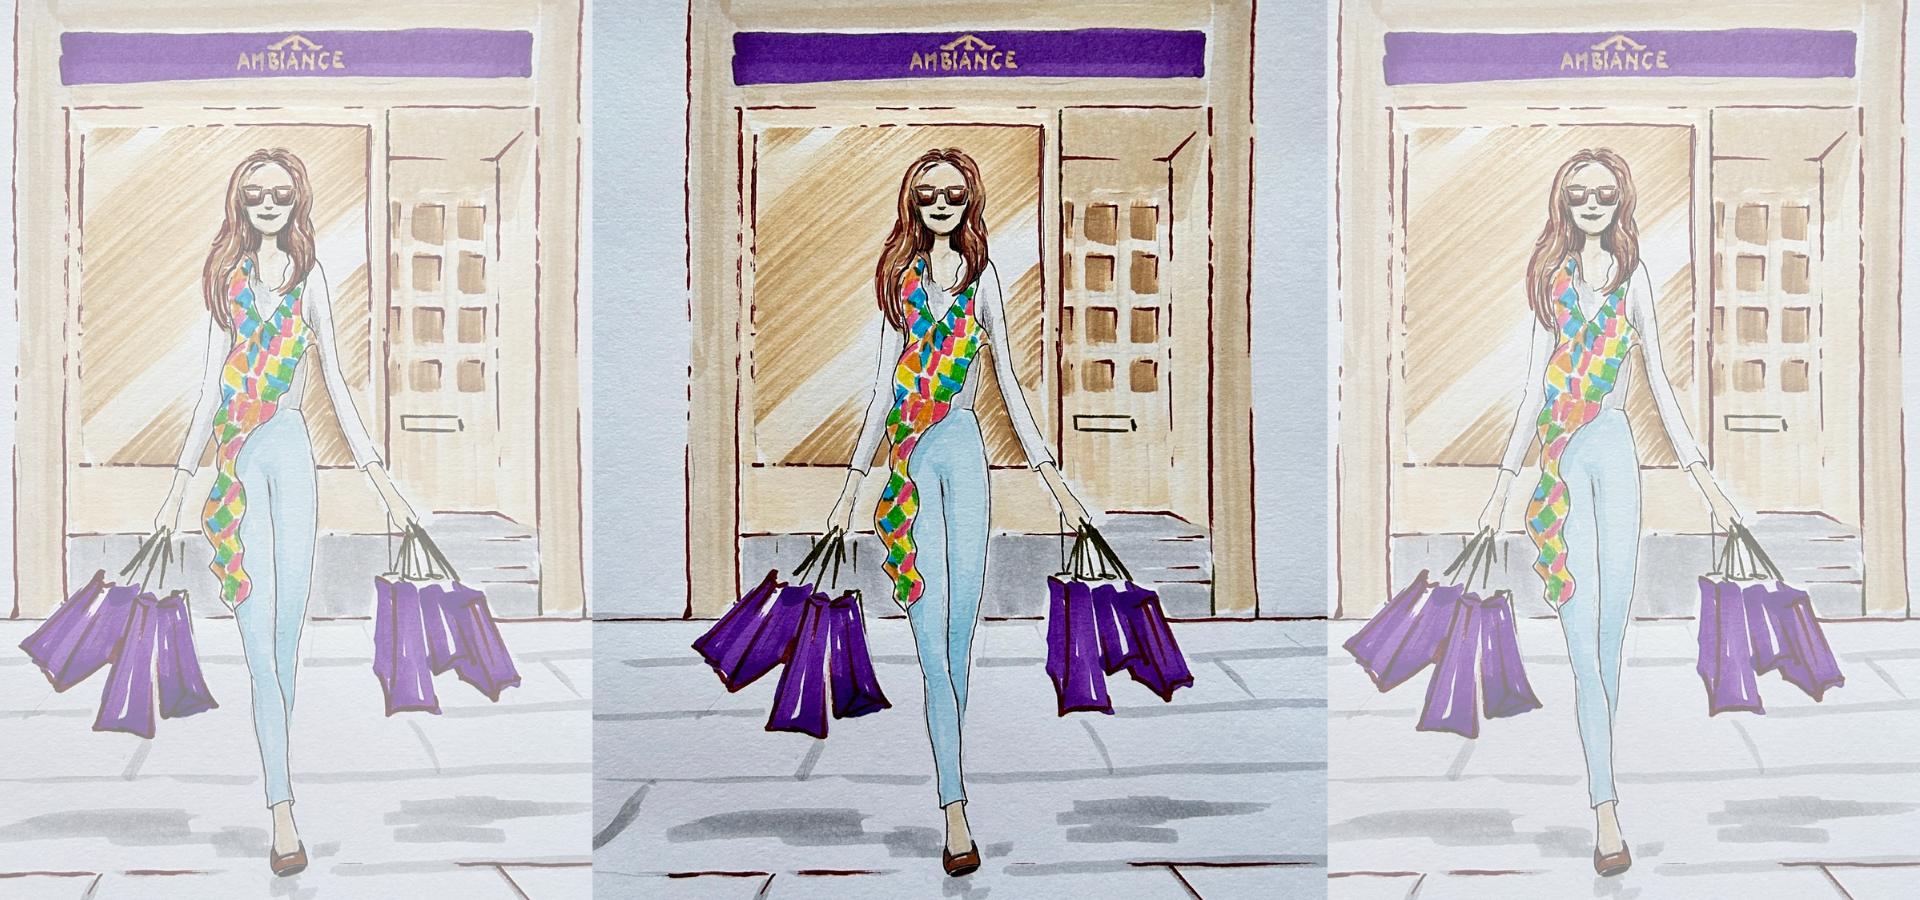 An illustration of a chic lady with sunglasses and long dark hair, leaving the Ambiance London boutique in Chelsea Green. She is dressed for Spring with an Ambiance luxury scarf and carrying Ambiance signature purple shopping bags.